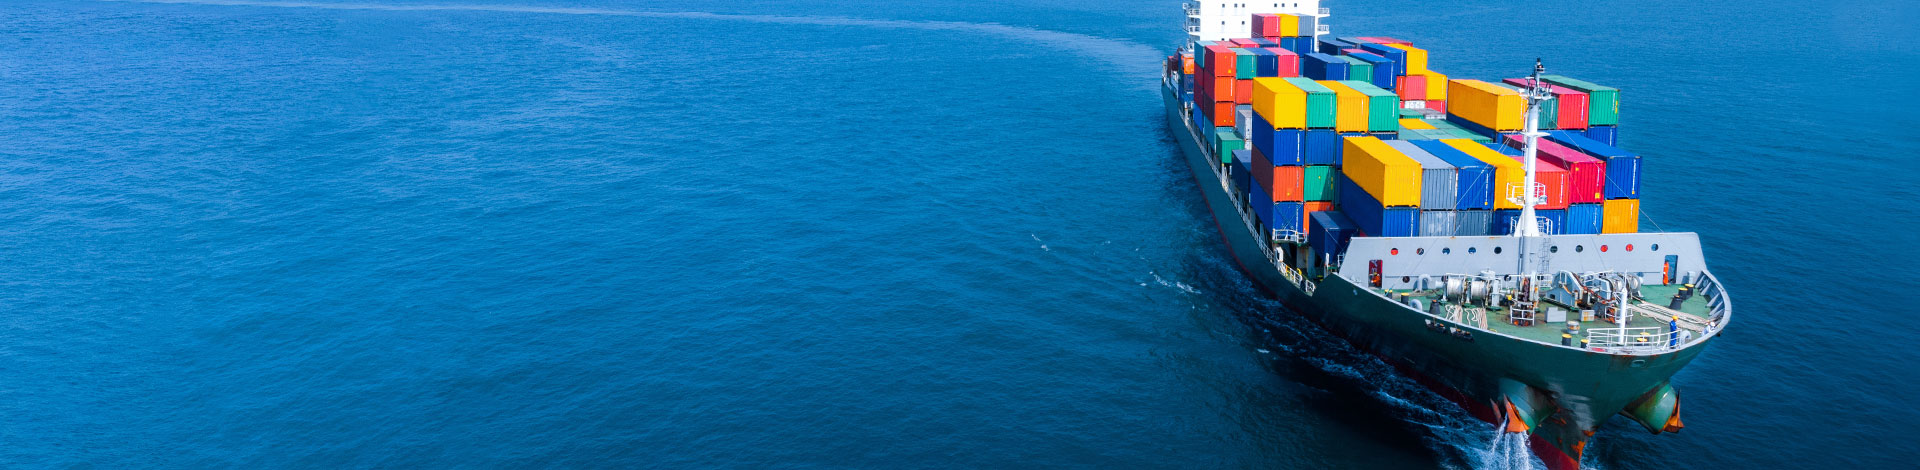 Aerial view of a large cargo ship in the ocean, carrying numerous colorful shipping containers, moving through blue water, creating a wake.